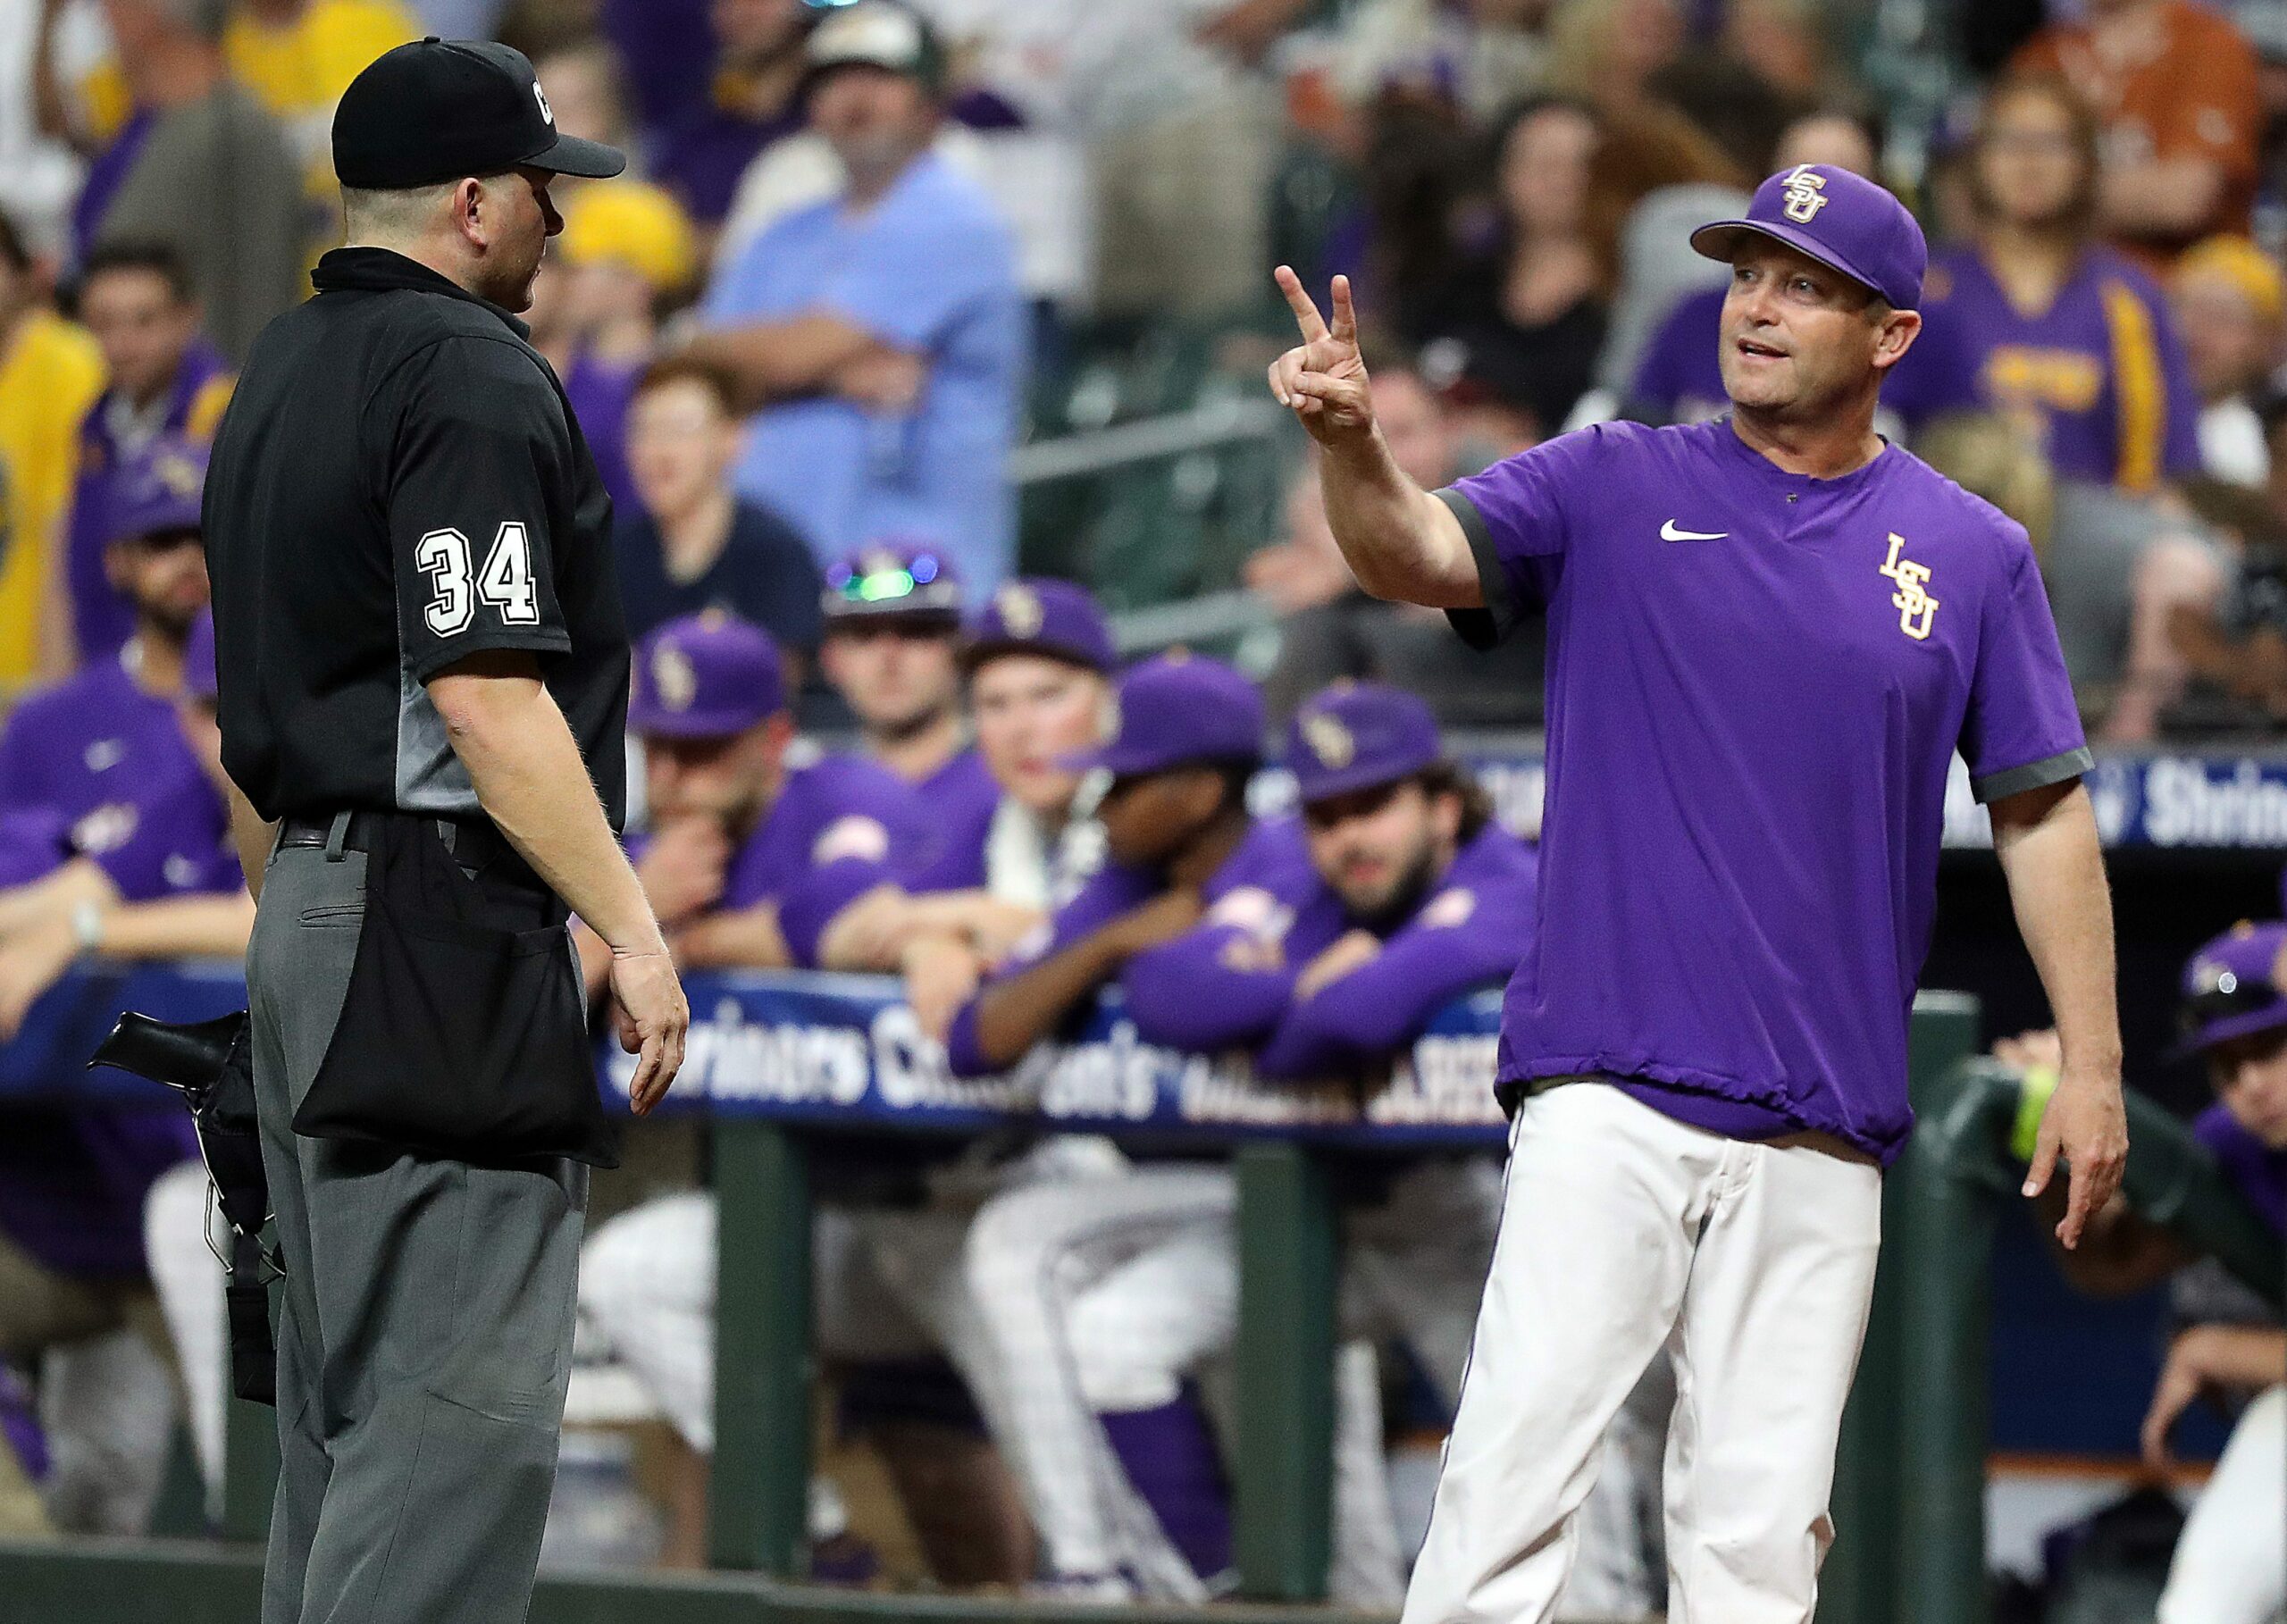 LOOK: LSU’s game vs. Kansas State ended with a hitting clock expiring, and baseball fans weren’t thrilled about it